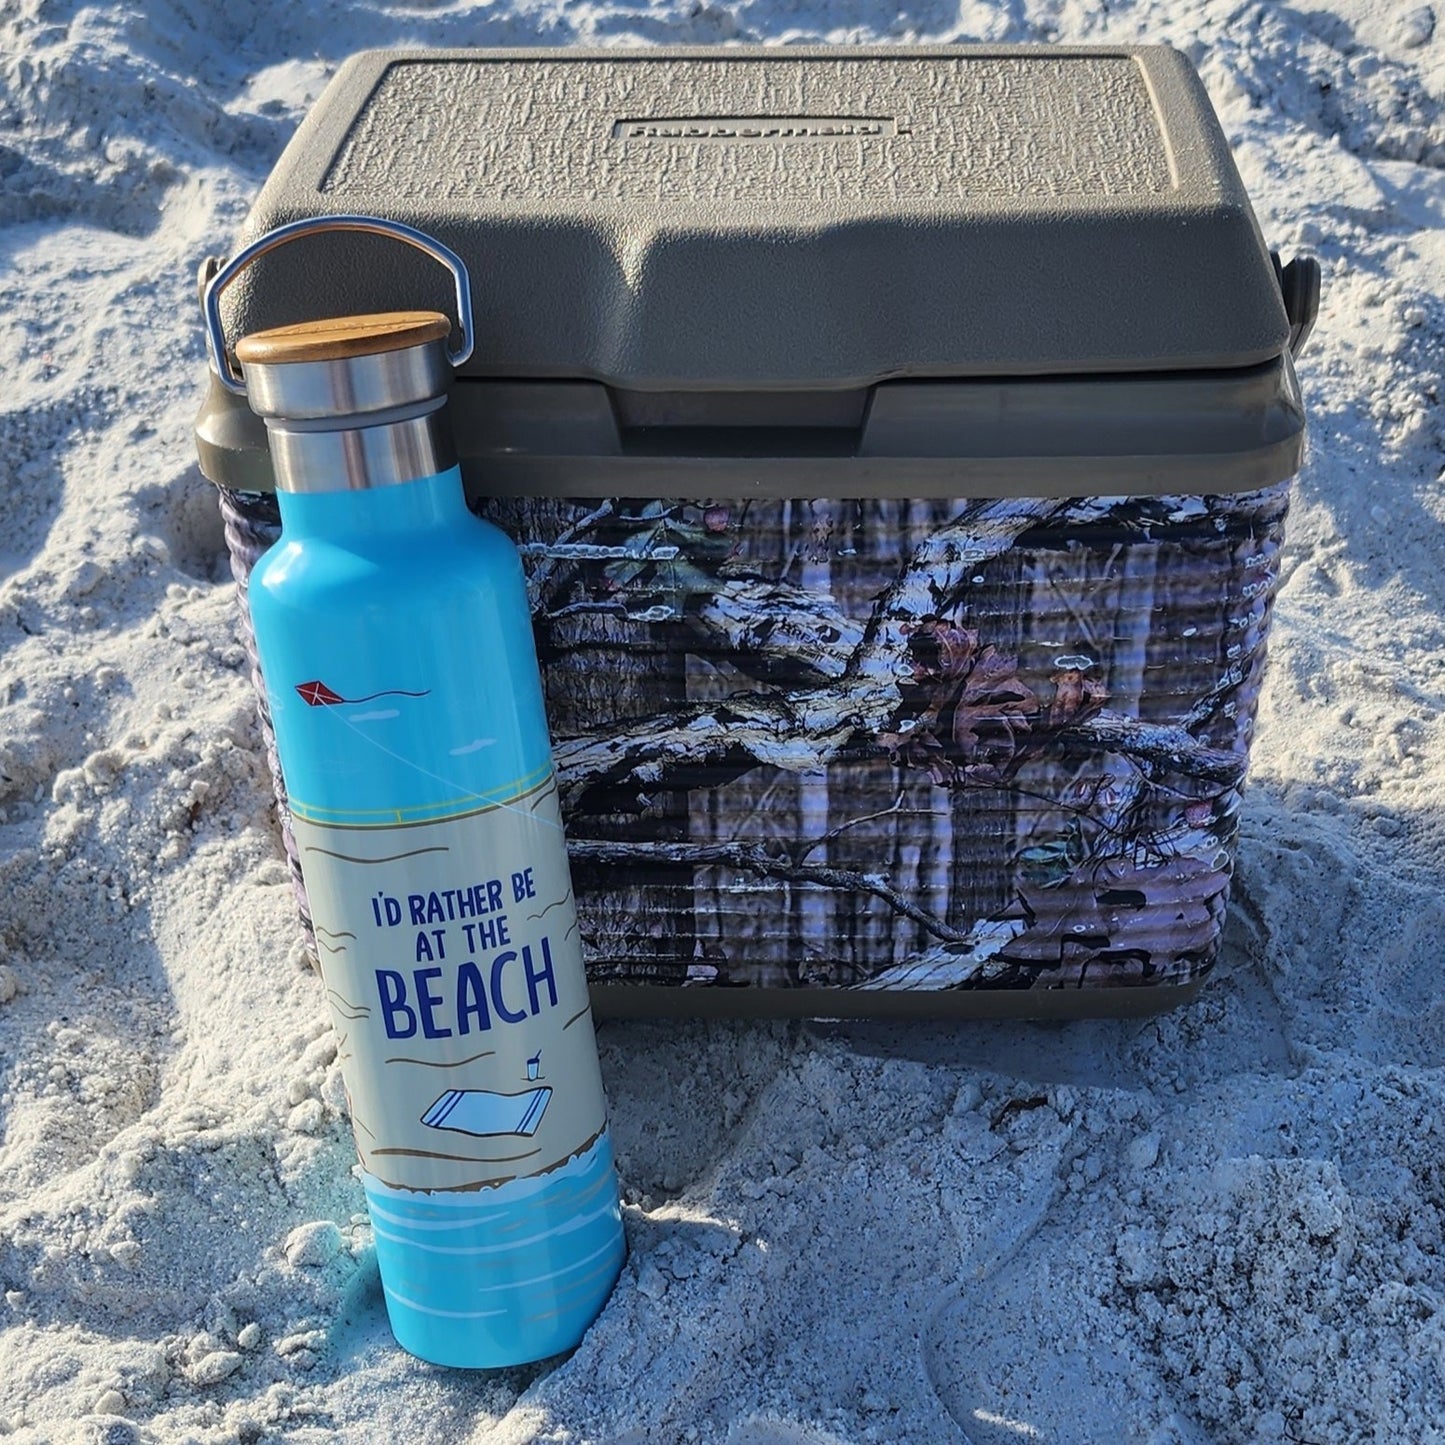 "I'd Rather Be At The Beach" - Insulated Bottle